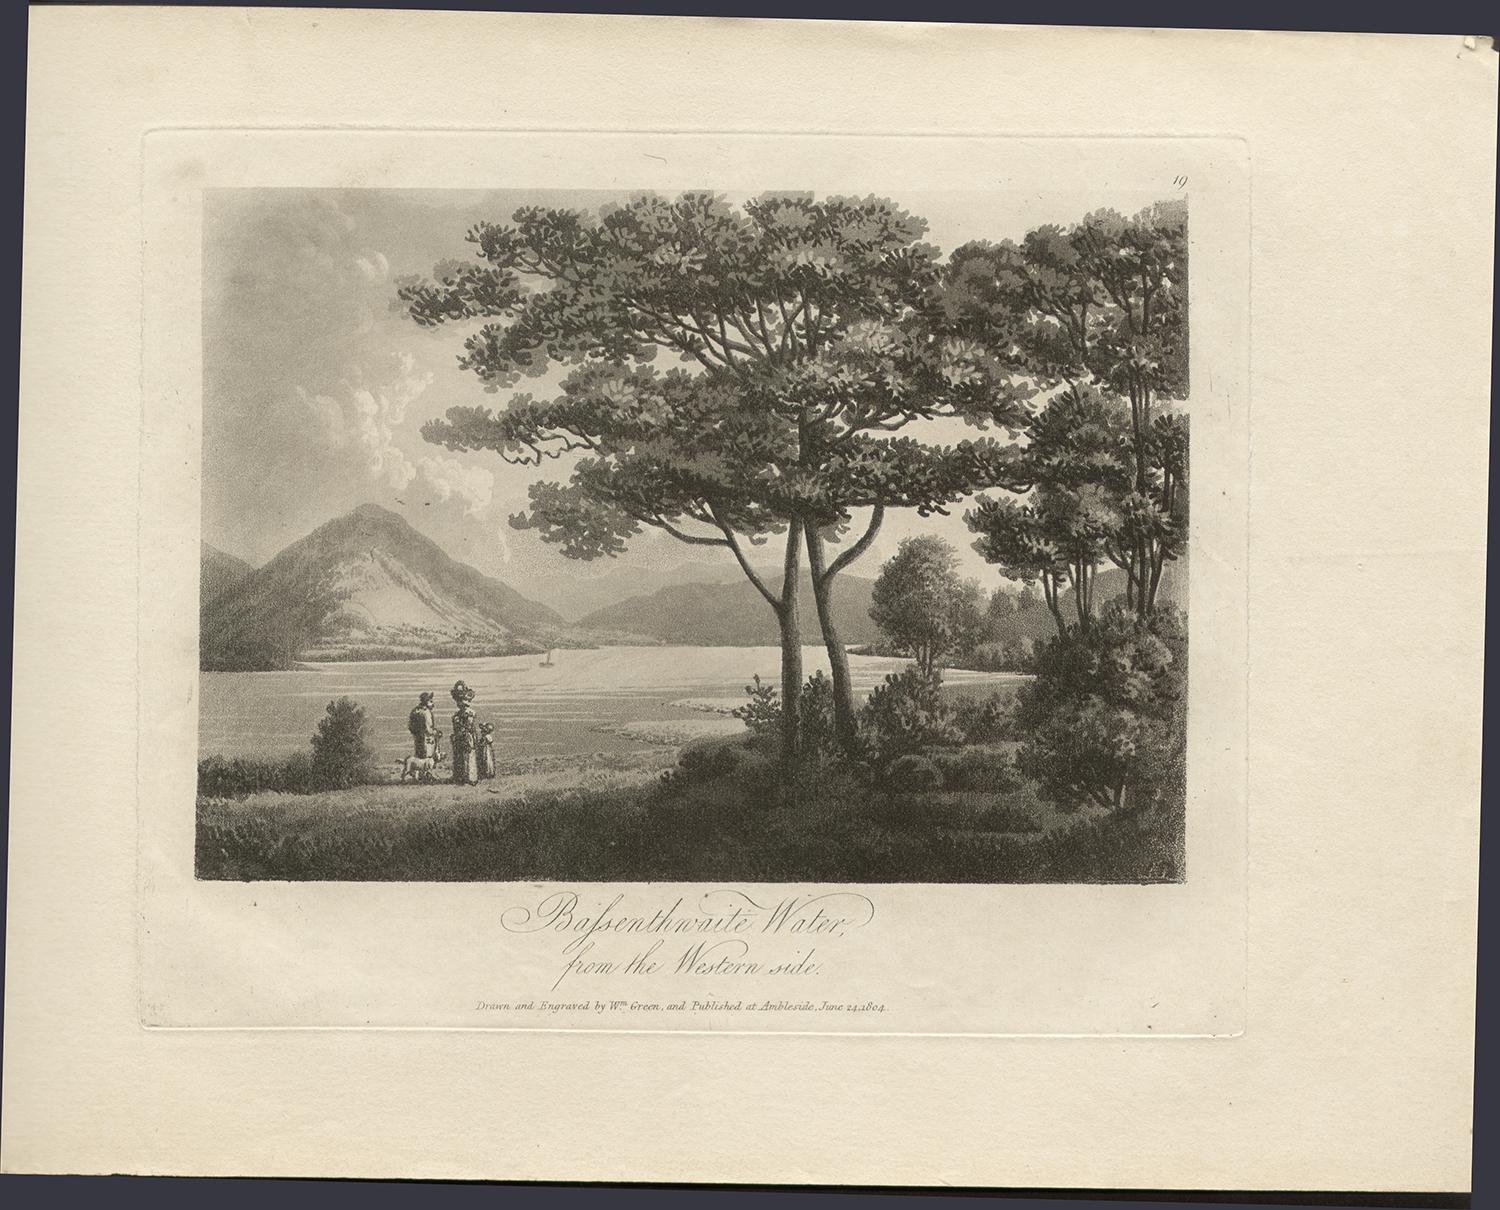 Bassenthwaite Water, from the Western Side, Lake District C19th English aquatint - Print by William Green